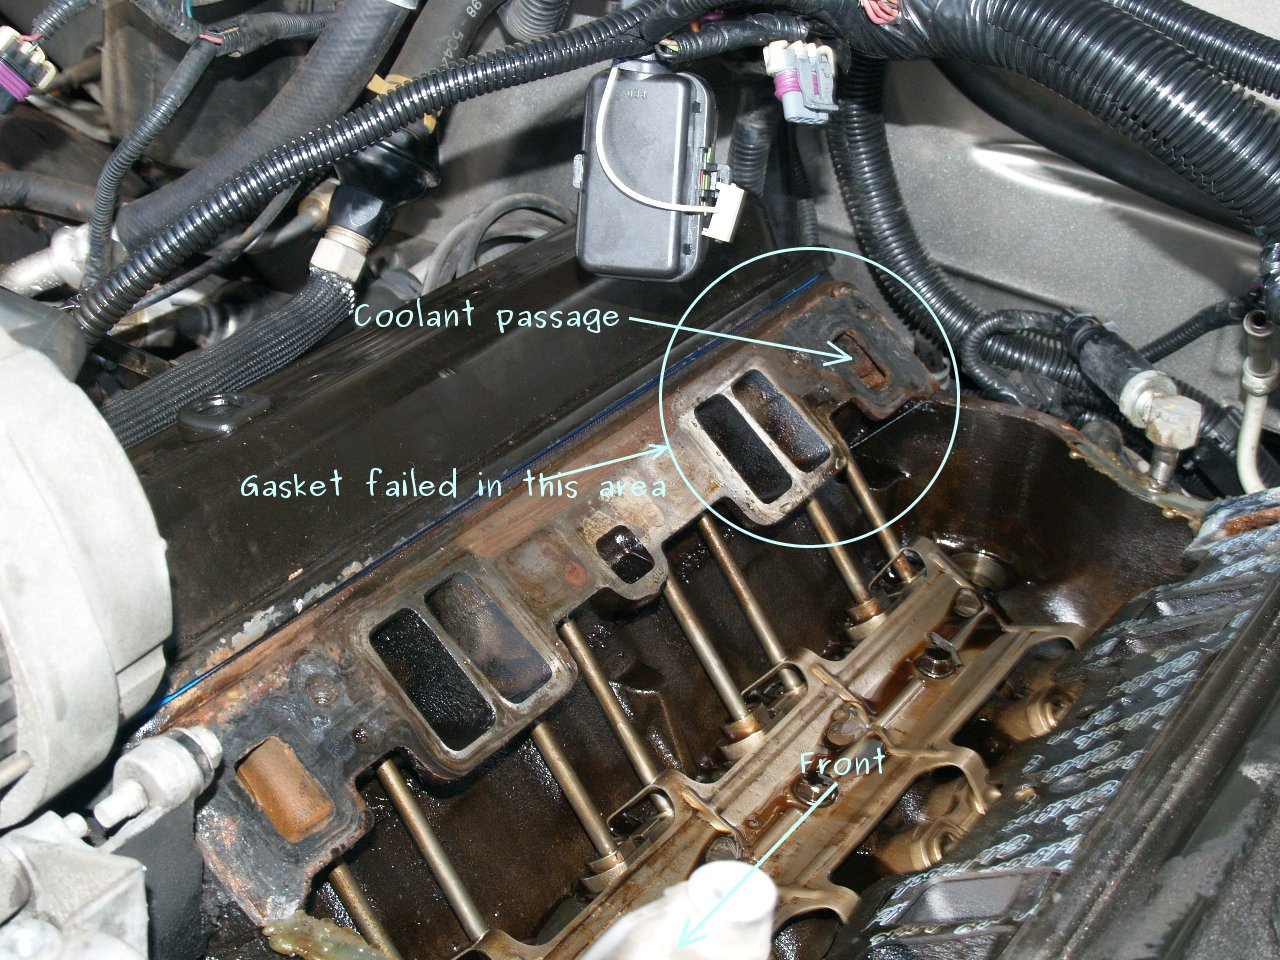 See P3693 in engine